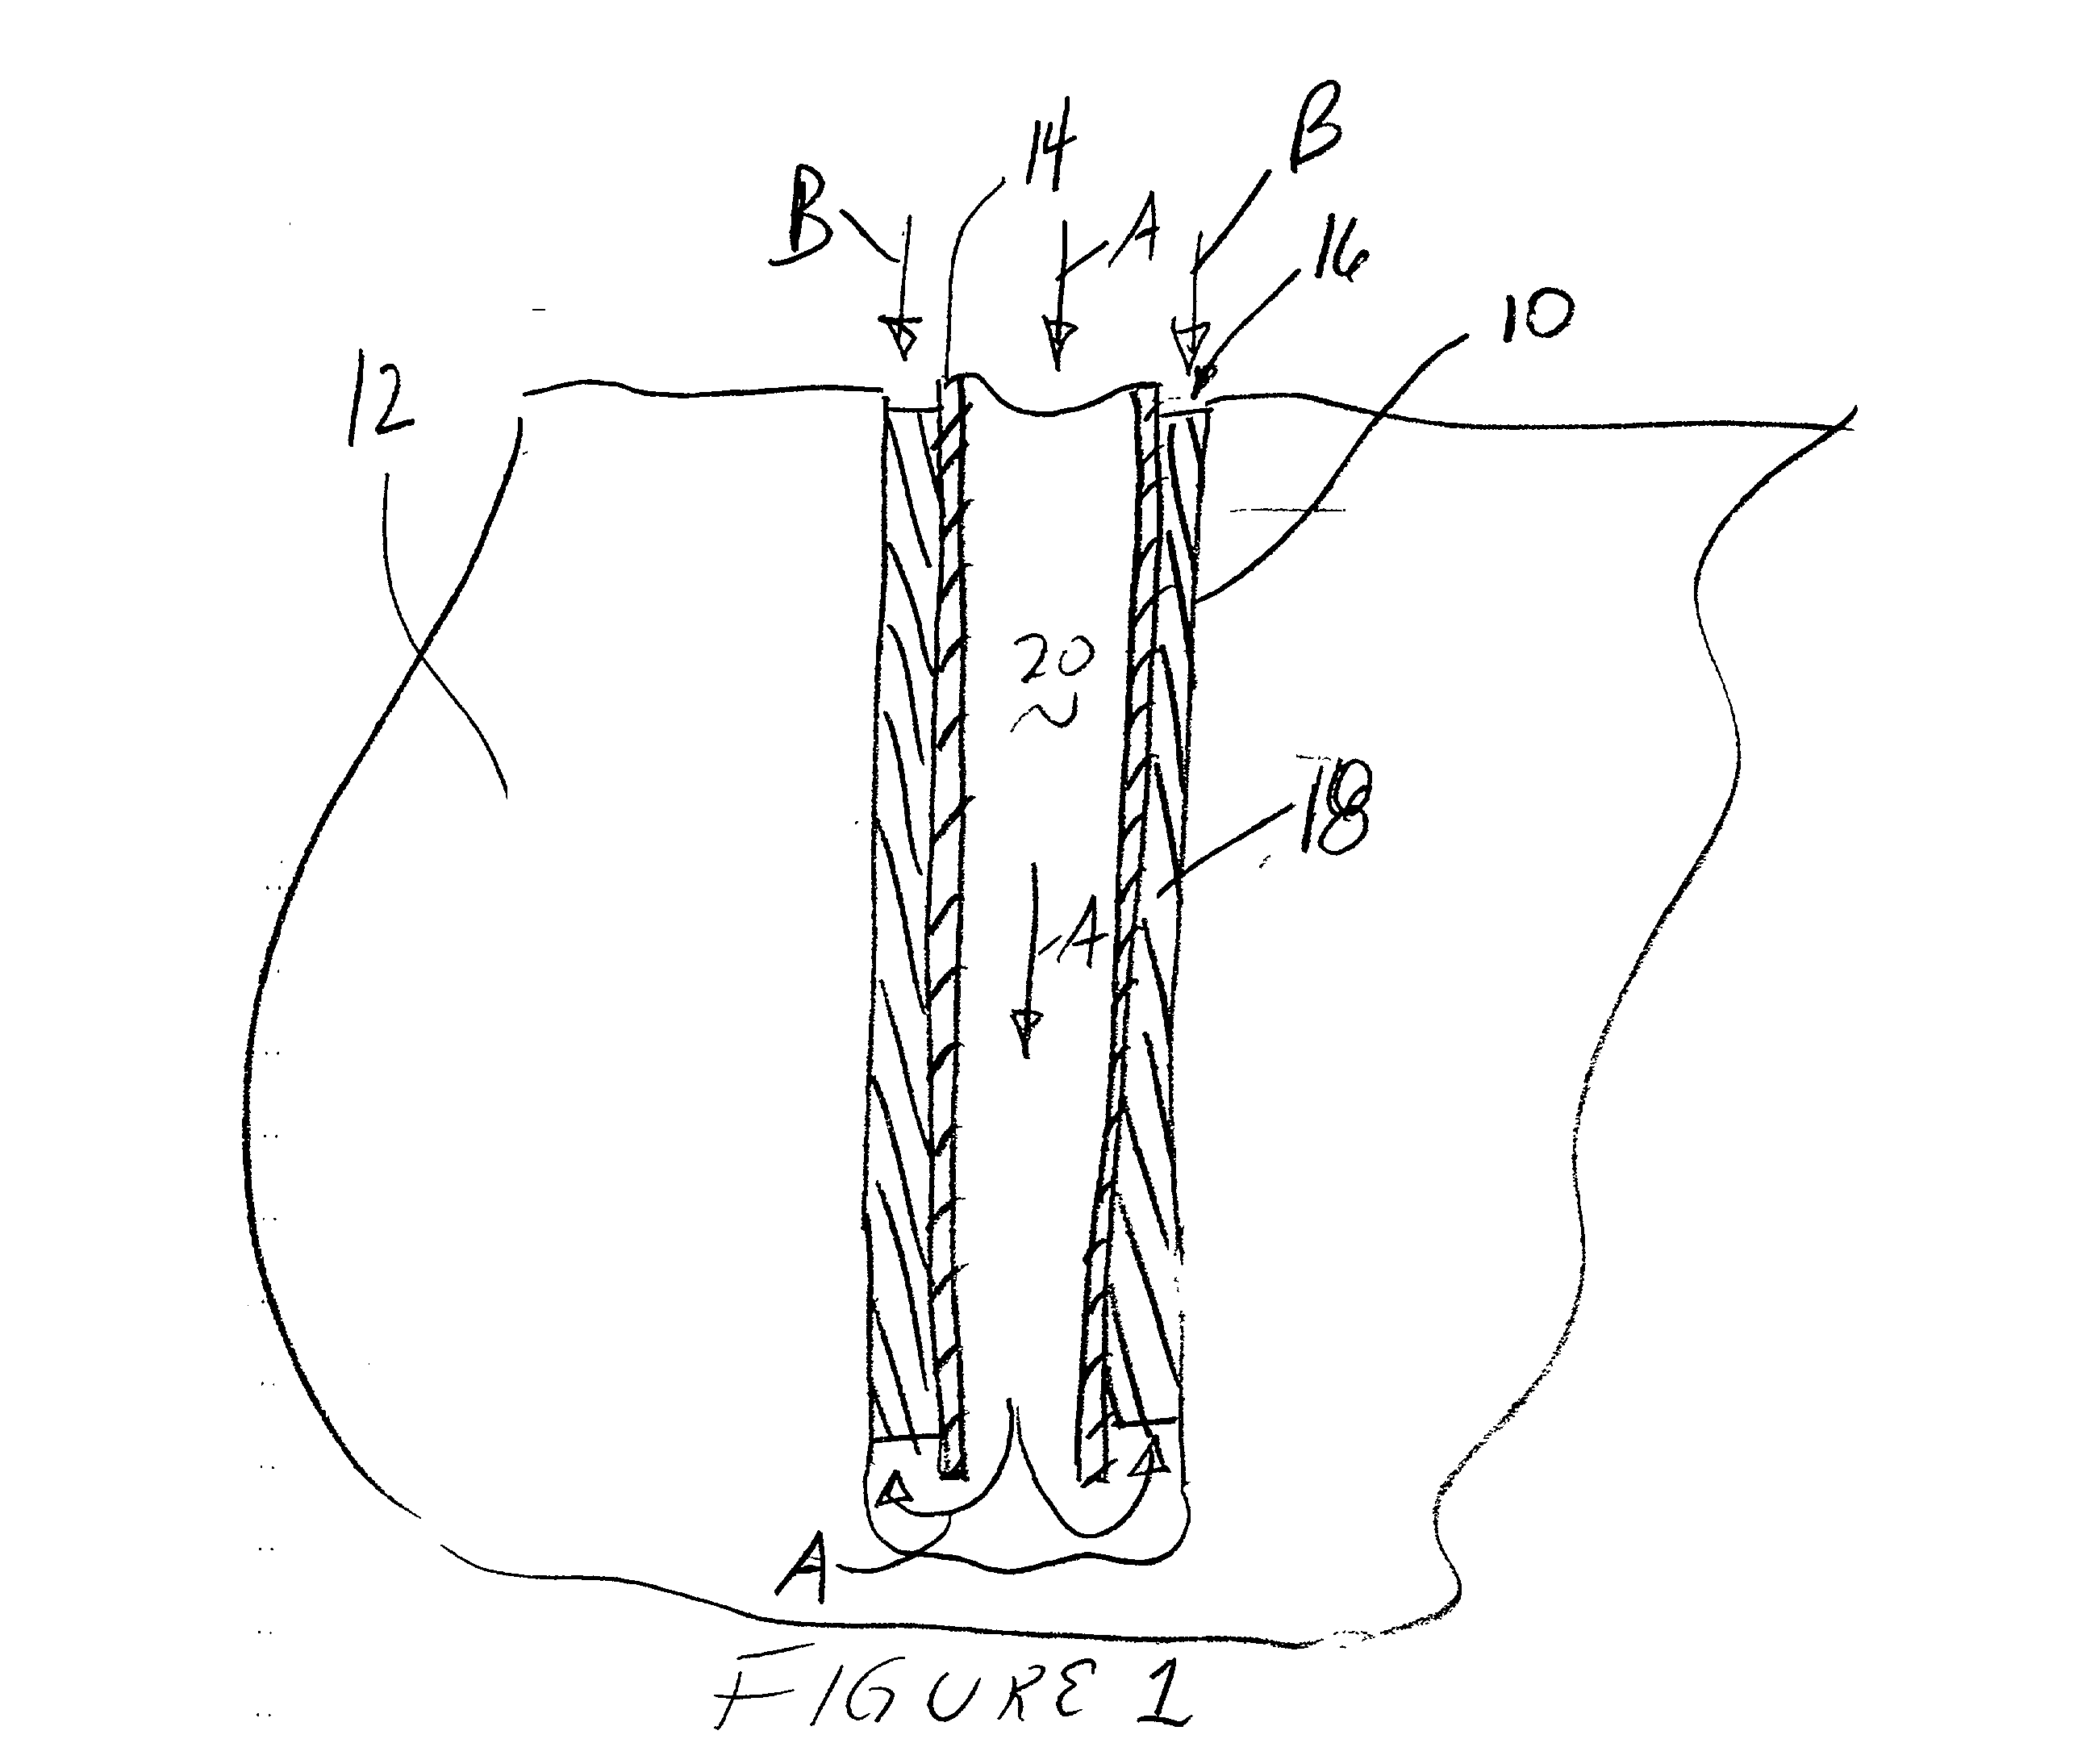 Composition and method for sealing an annular space between a well bore and a casing